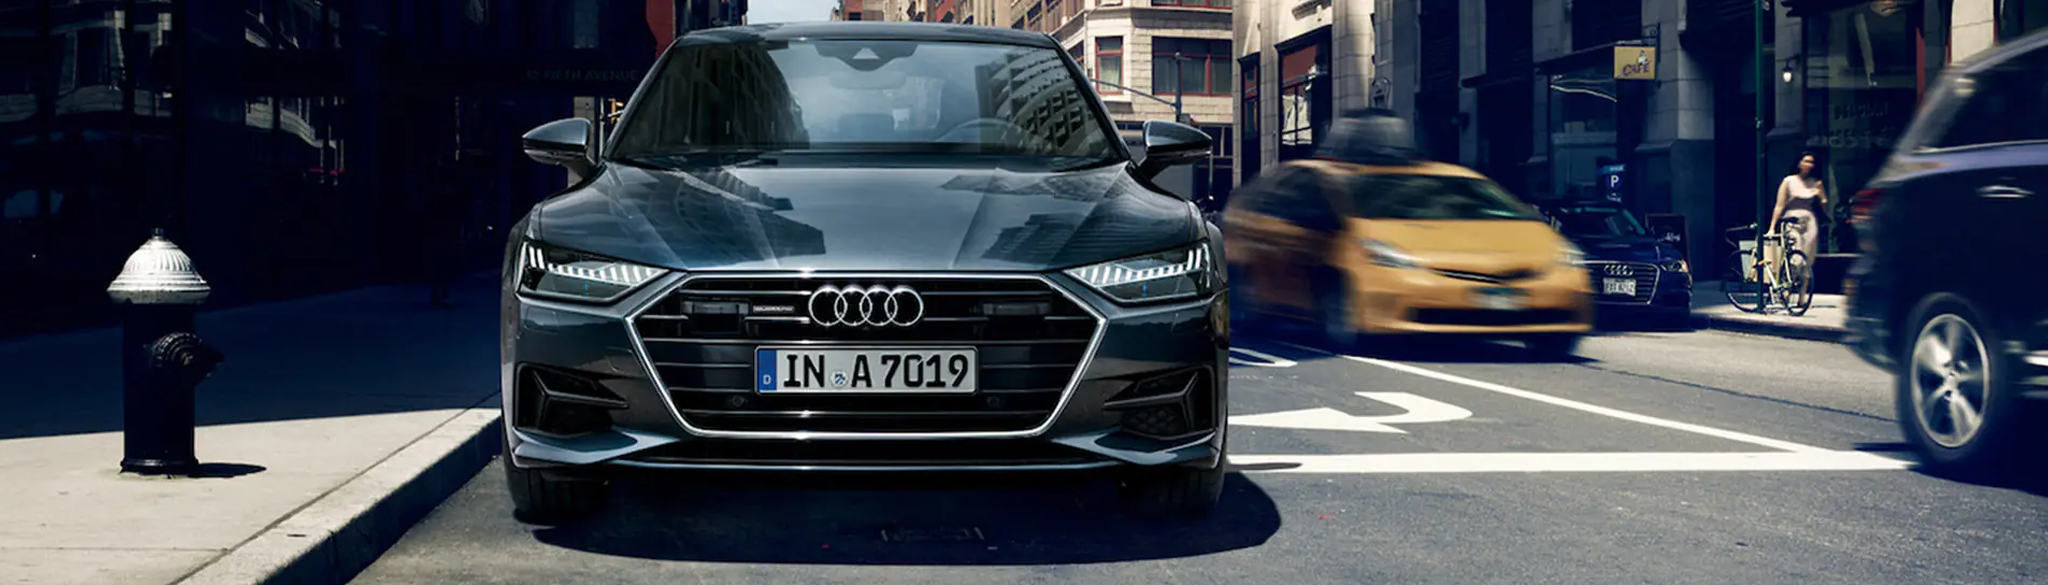 Audi A7 Sportback front profile on the road